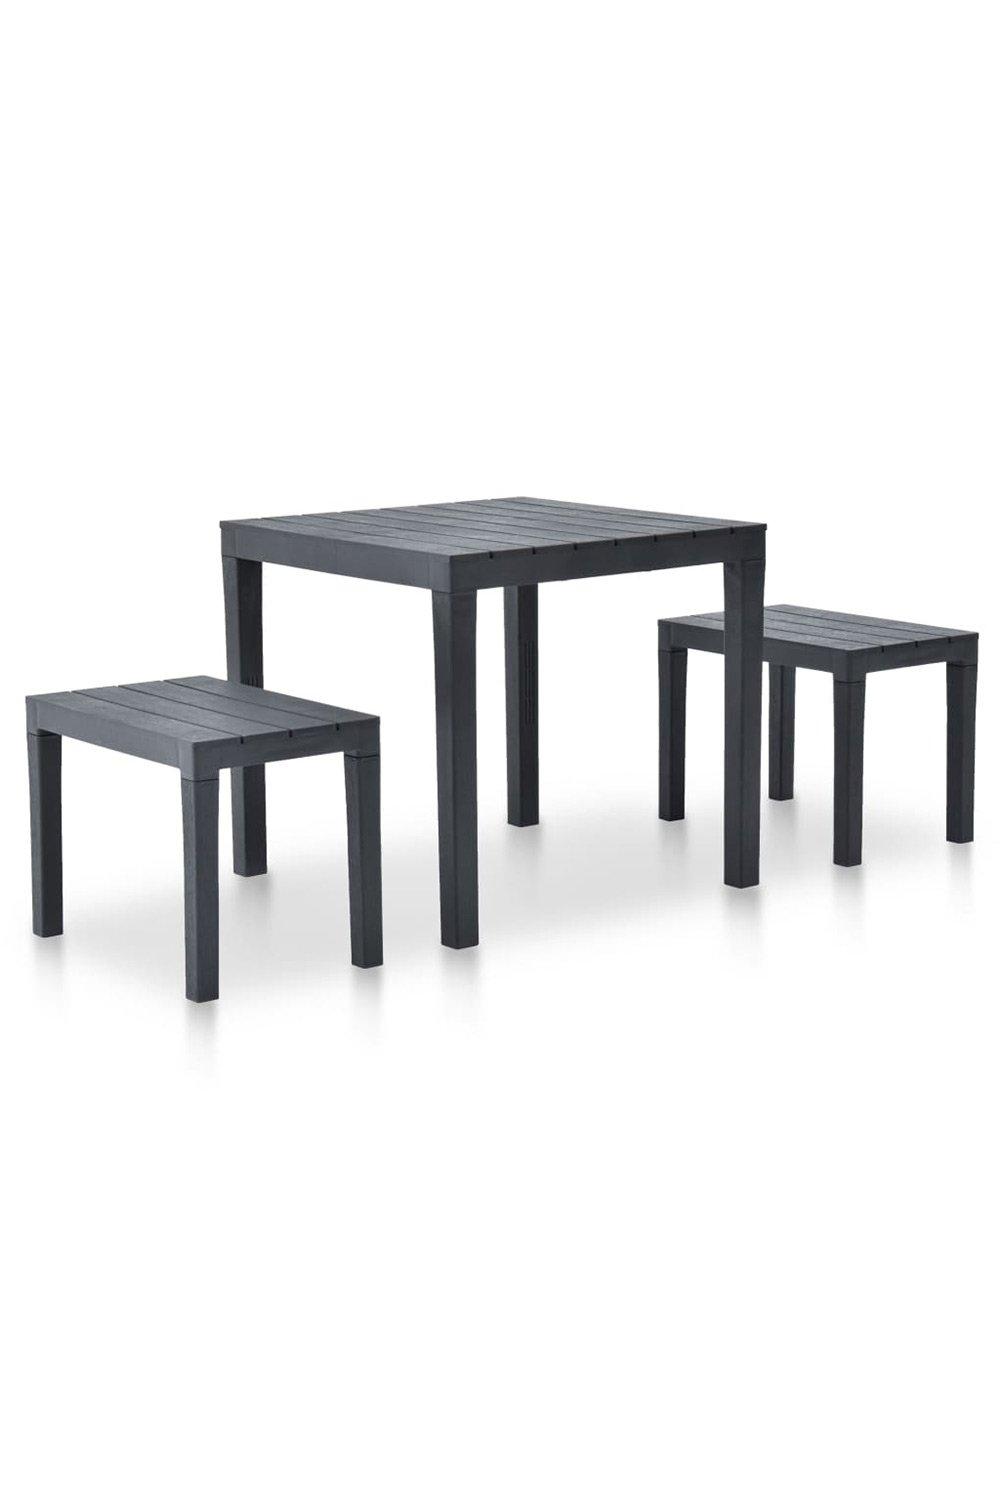 The Timor 2 seat Bench & table set